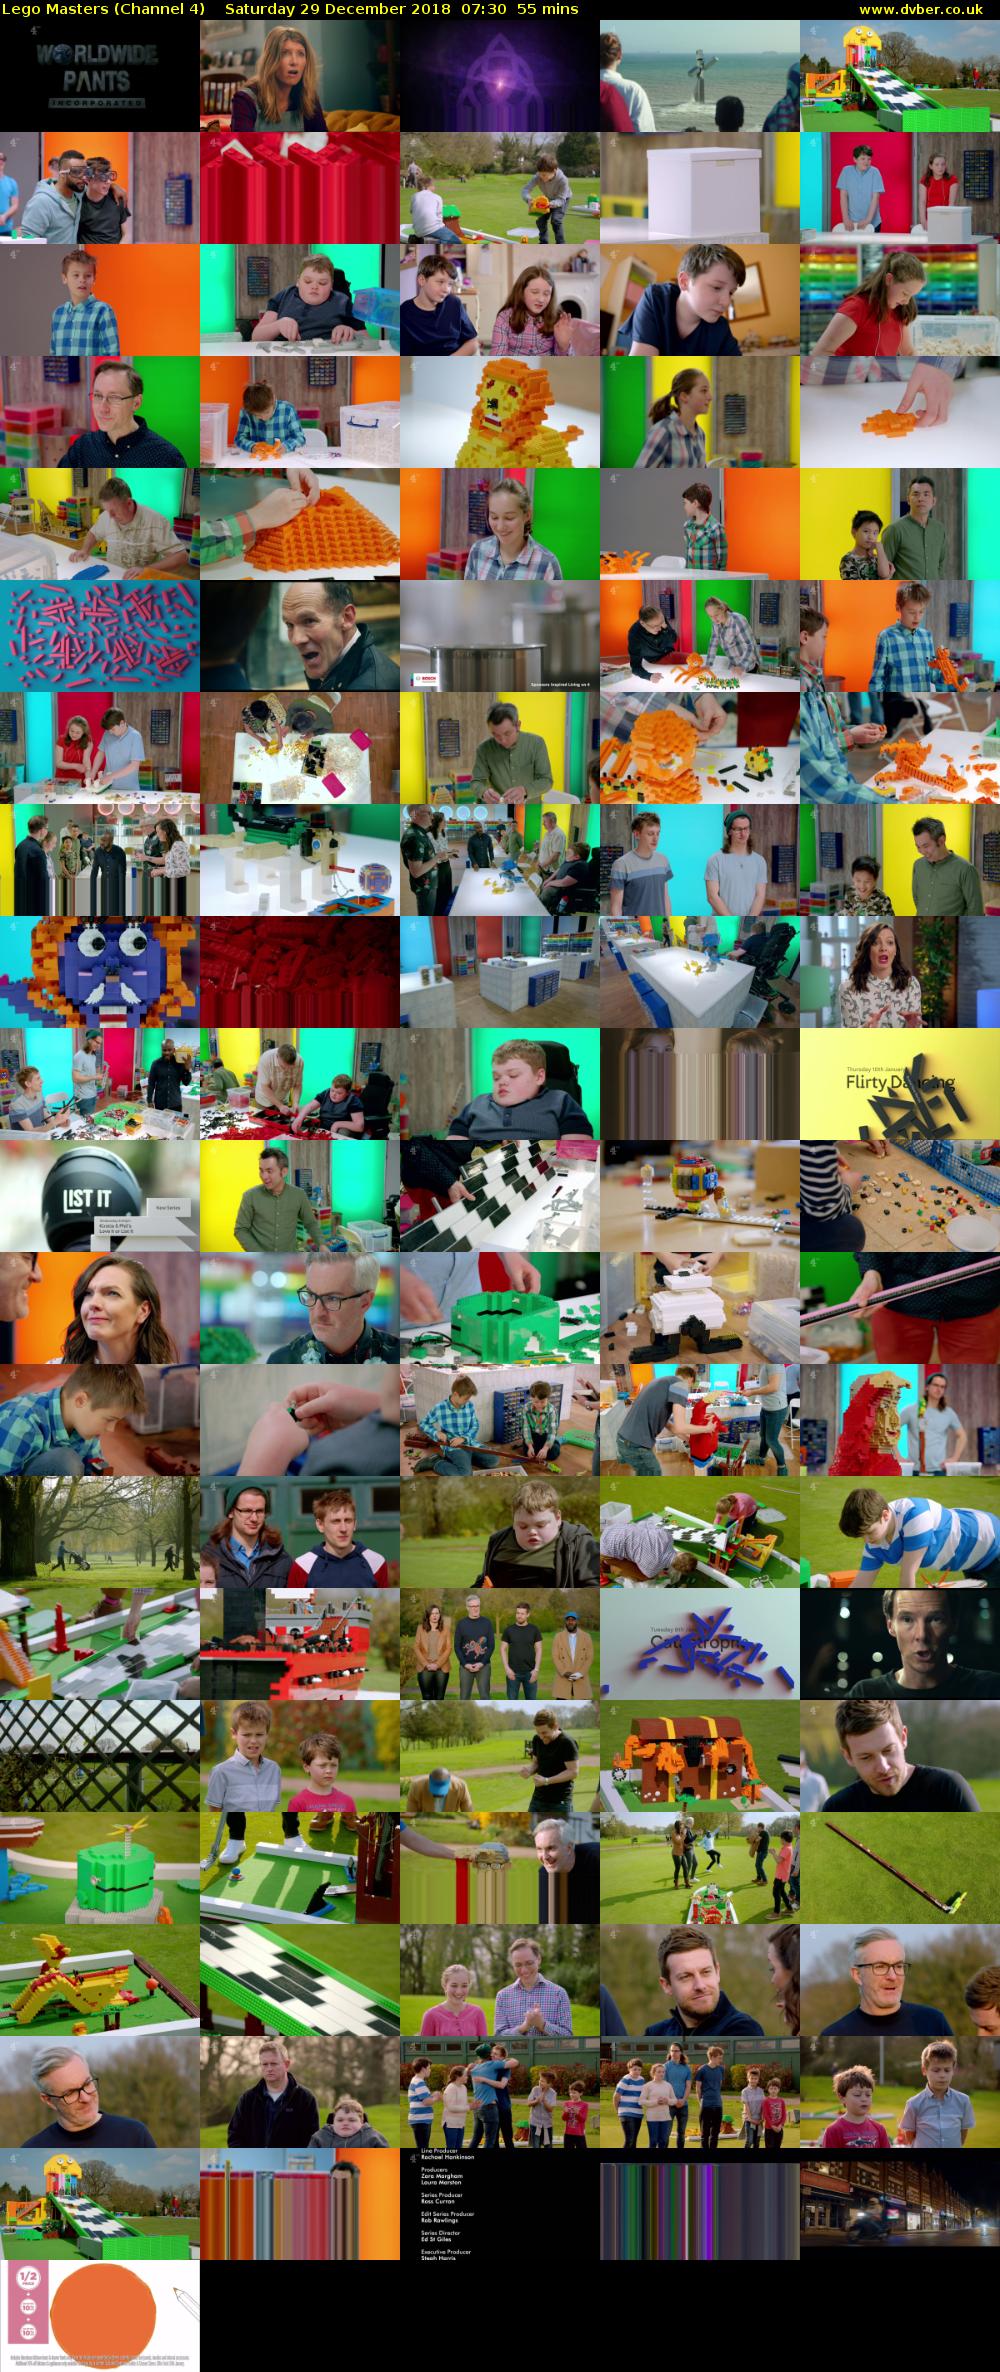 Lego Masters (Channel 4) Saturday 29 December 2018 07:30 - 08:25